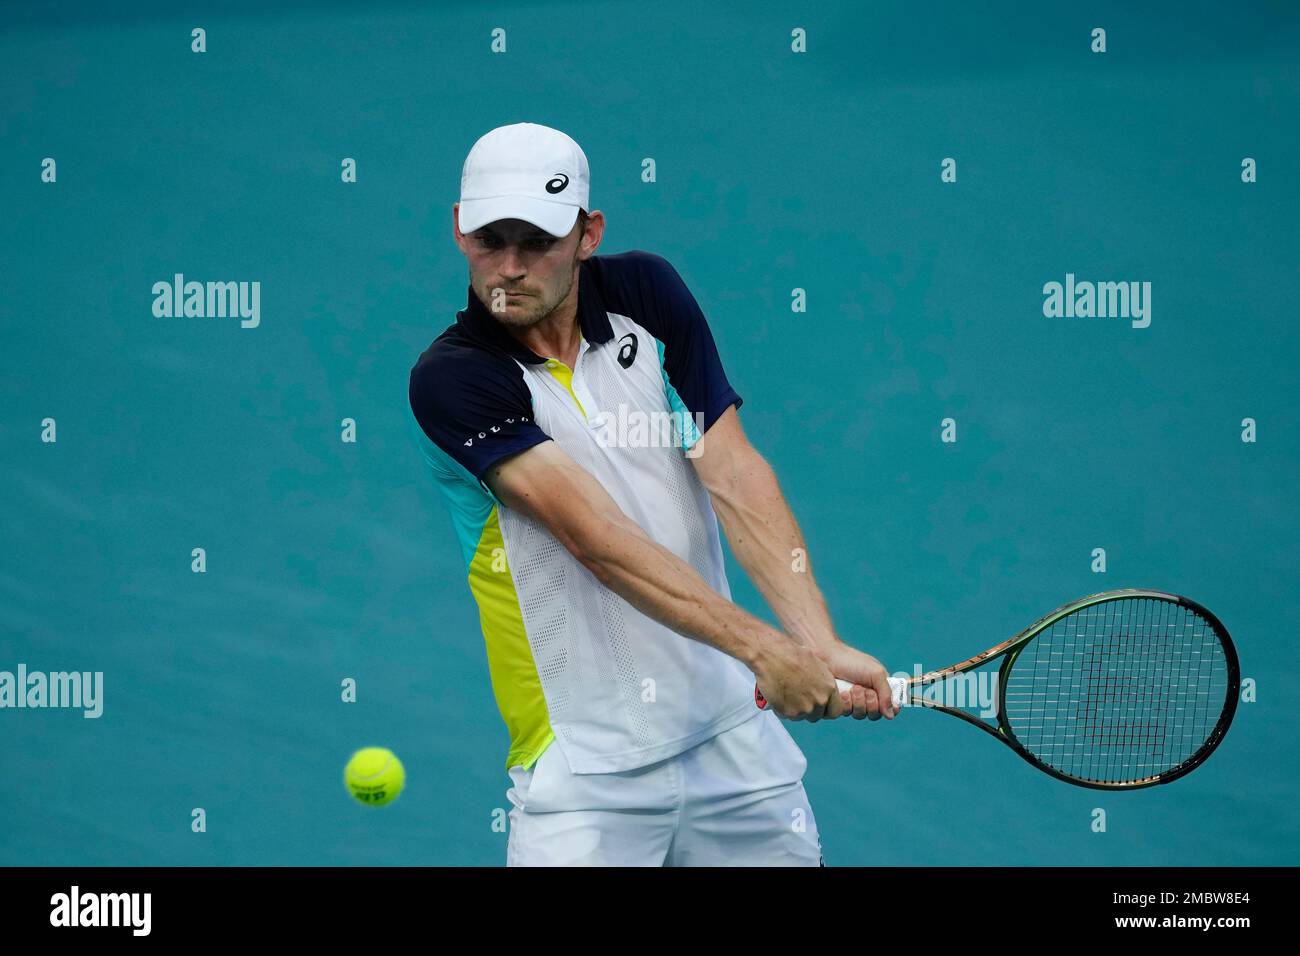 David Goffin of Belgium returns a ball in his first round mens match against Roberto Carballes Baena of Spain, at the Miami Open tennis tournament, Wednesday, March 23, 2022, in Miami Gardens,